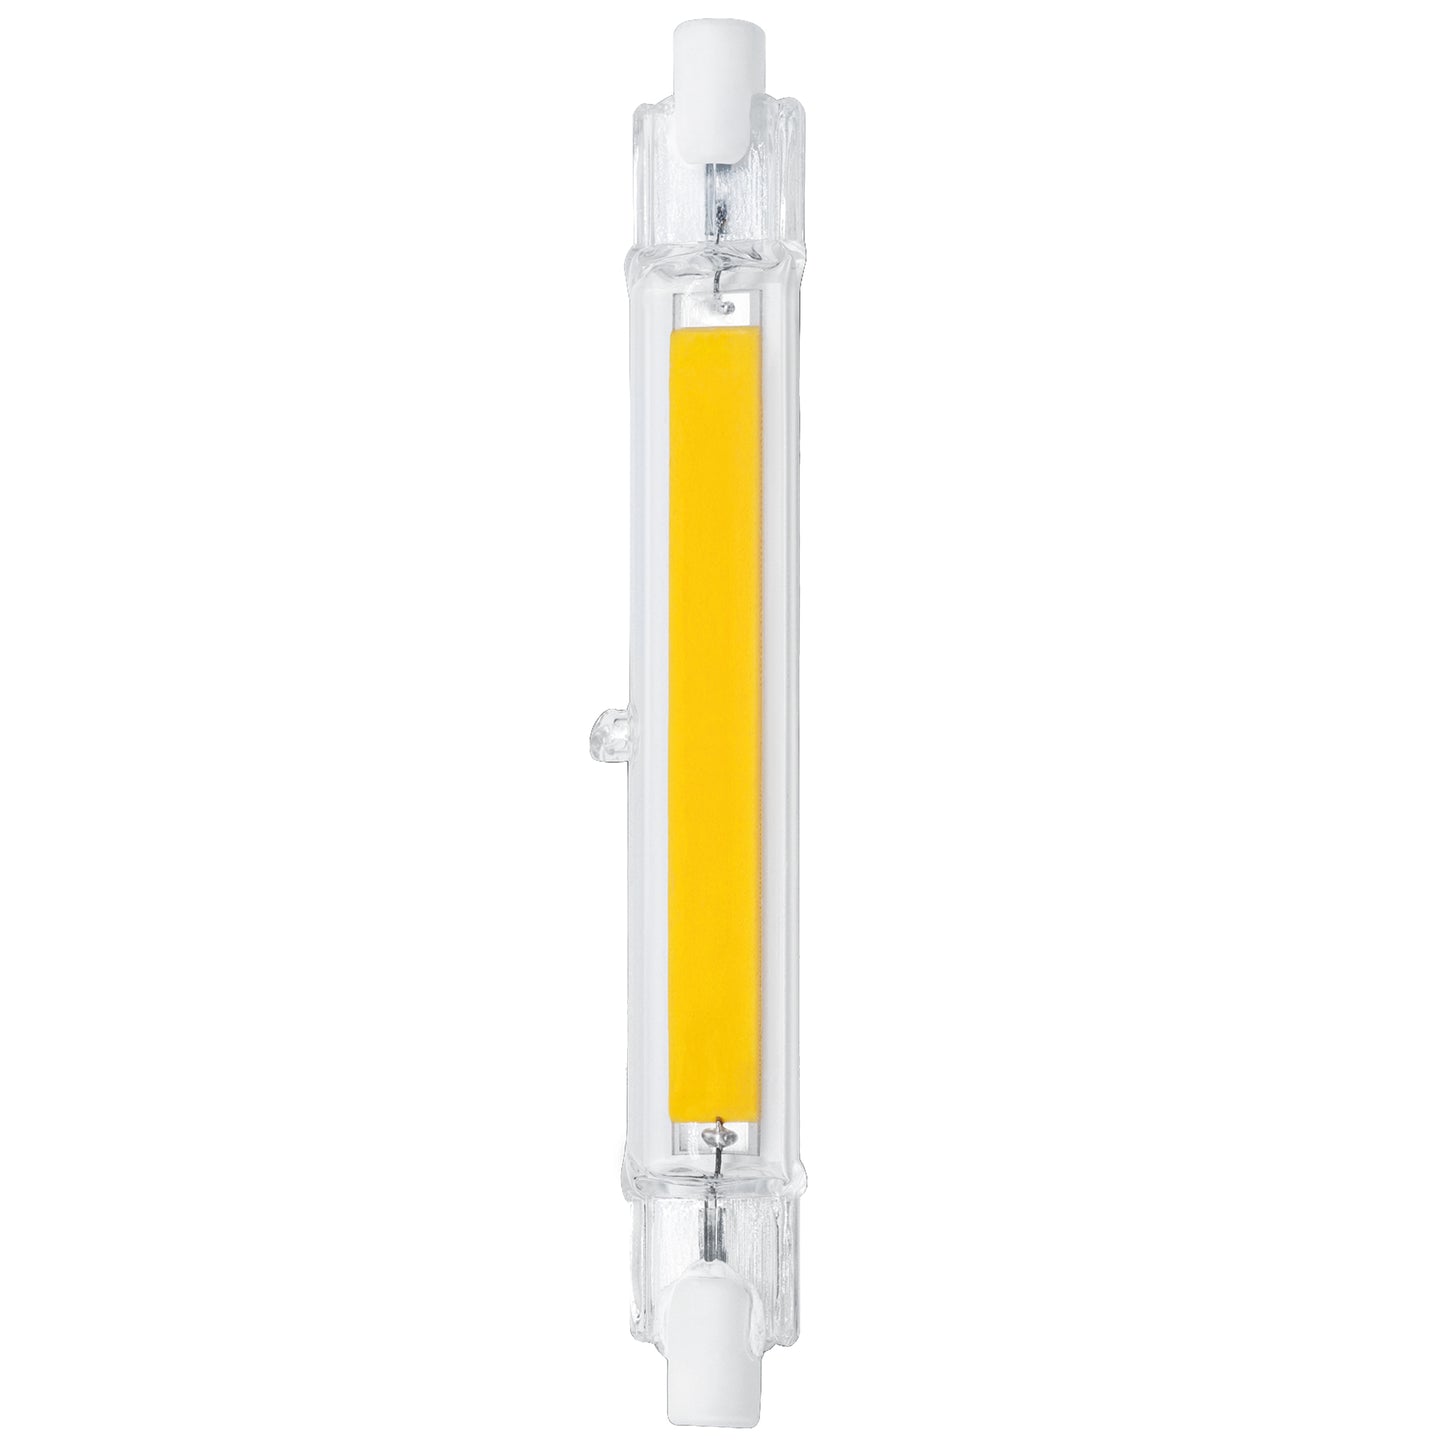 MATEL LAMPE LED COB LINEAIRE 14X118MM 10W FROID 